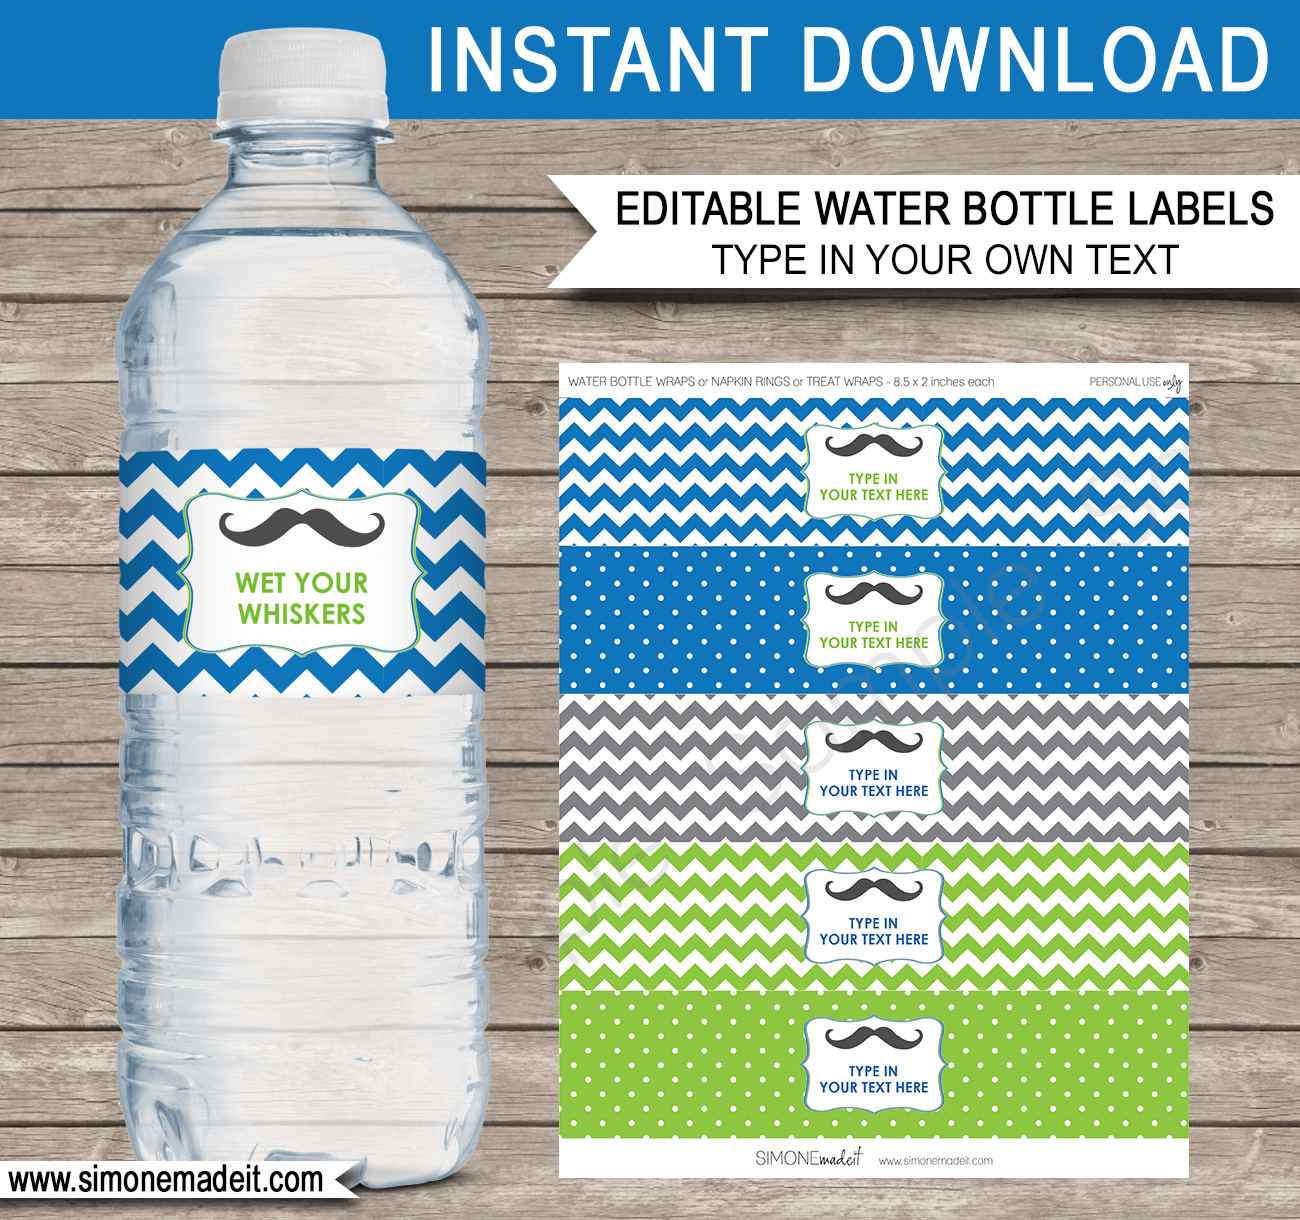 Printable Little Man or Mustache Party Water Bottle Labels | Baby Shower or Birthday Party Theme | Editable DIY Template | $3.00 INSTANT DOWNLOAD via SIMONEmadeit.com